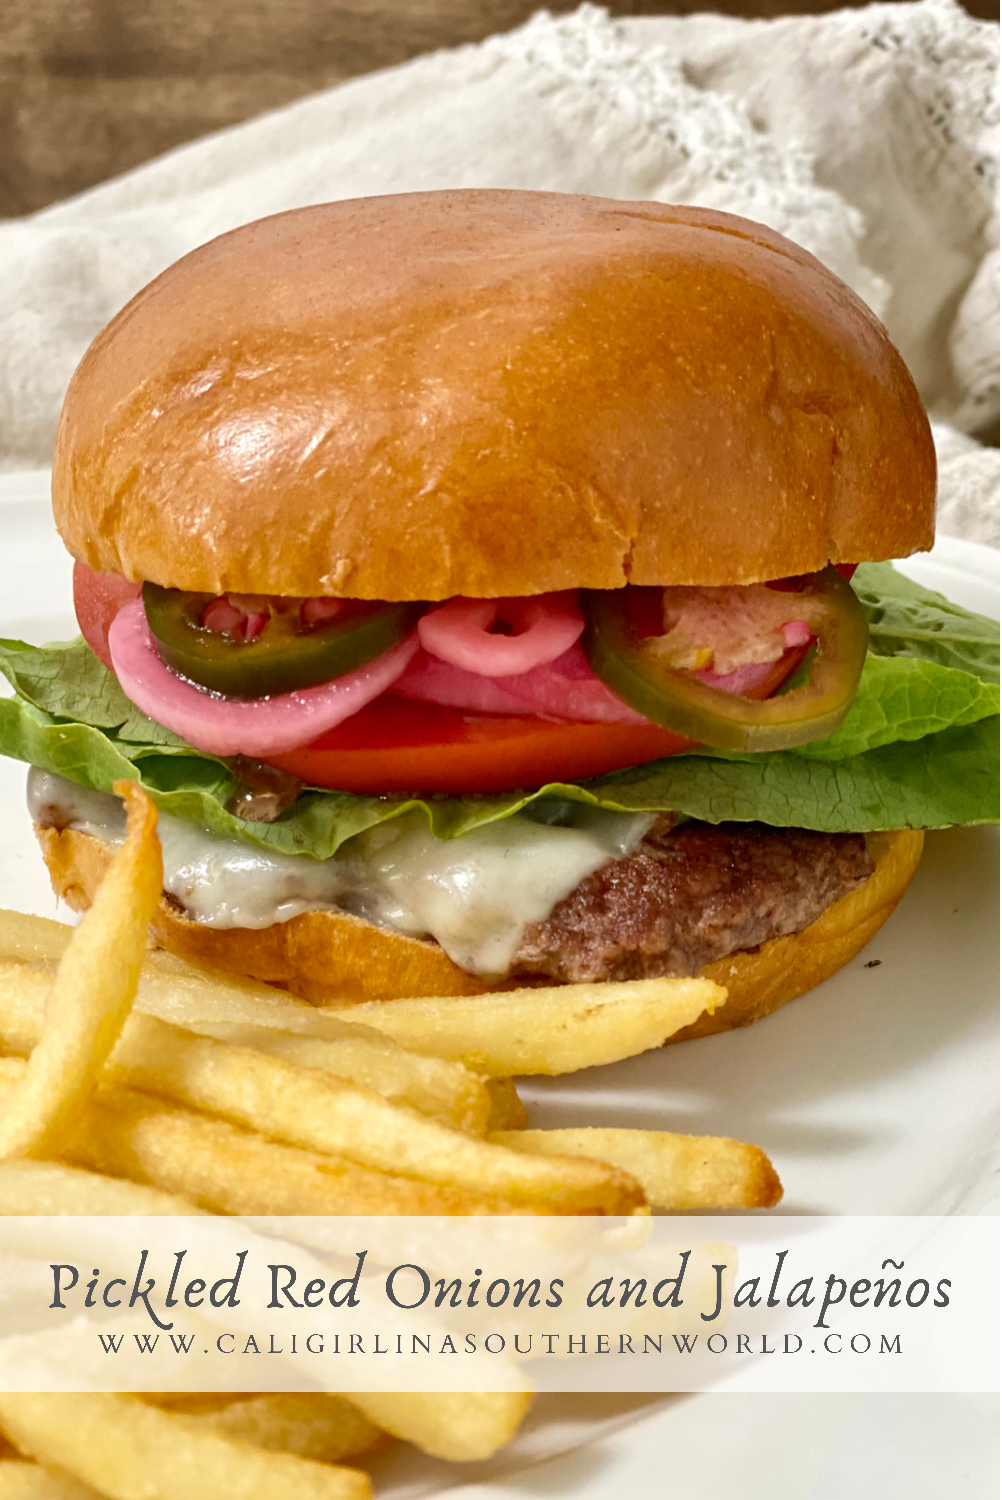 Pinterest Pin of a cheeseburger with pickled onions and jalapenos, lettuce, and tomato on it.